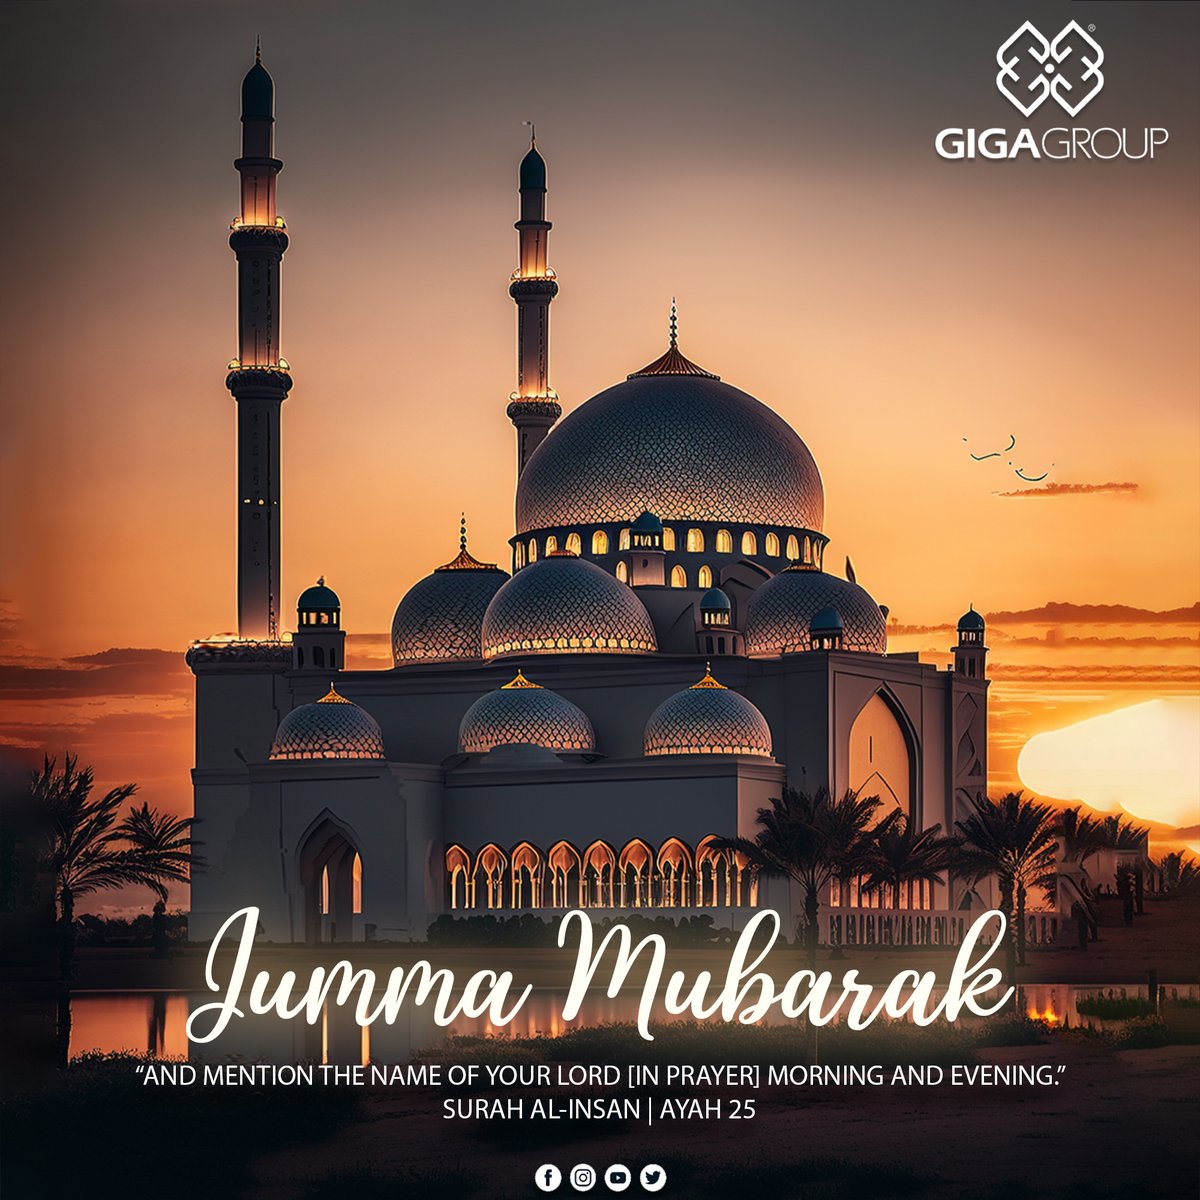 𝐉𝐮𝐦𝐦𝐚 𝐌𝐮𝐛𝐚𝐫𝐚𝐤! 'And mention the name of your Lord [in prayer] morning and evening.' (Surah-Al-Insan : 25) . . #gigagroup #Friday #prayers #fridayblessings #fridayprayers #fridaypost #FridayBlessings #jummamubarak #Fridayvibes #islamicday #WTCPAK